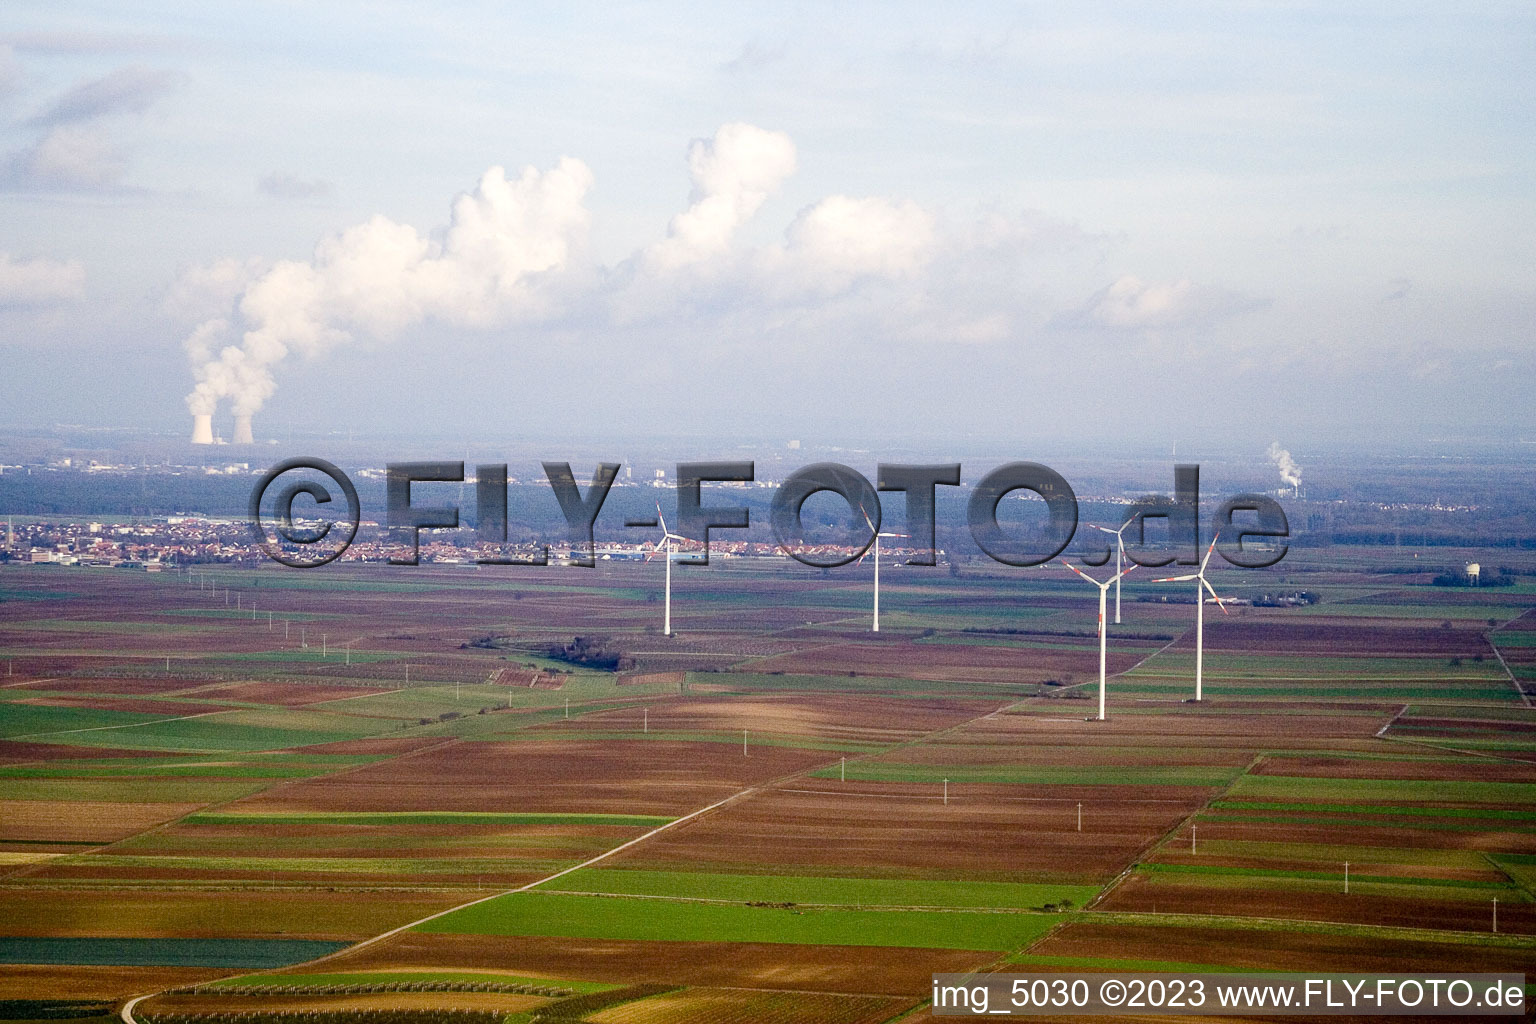 Wind turbines from the southwest in Bellheim in the state Rhineland-Palatinate, Germany